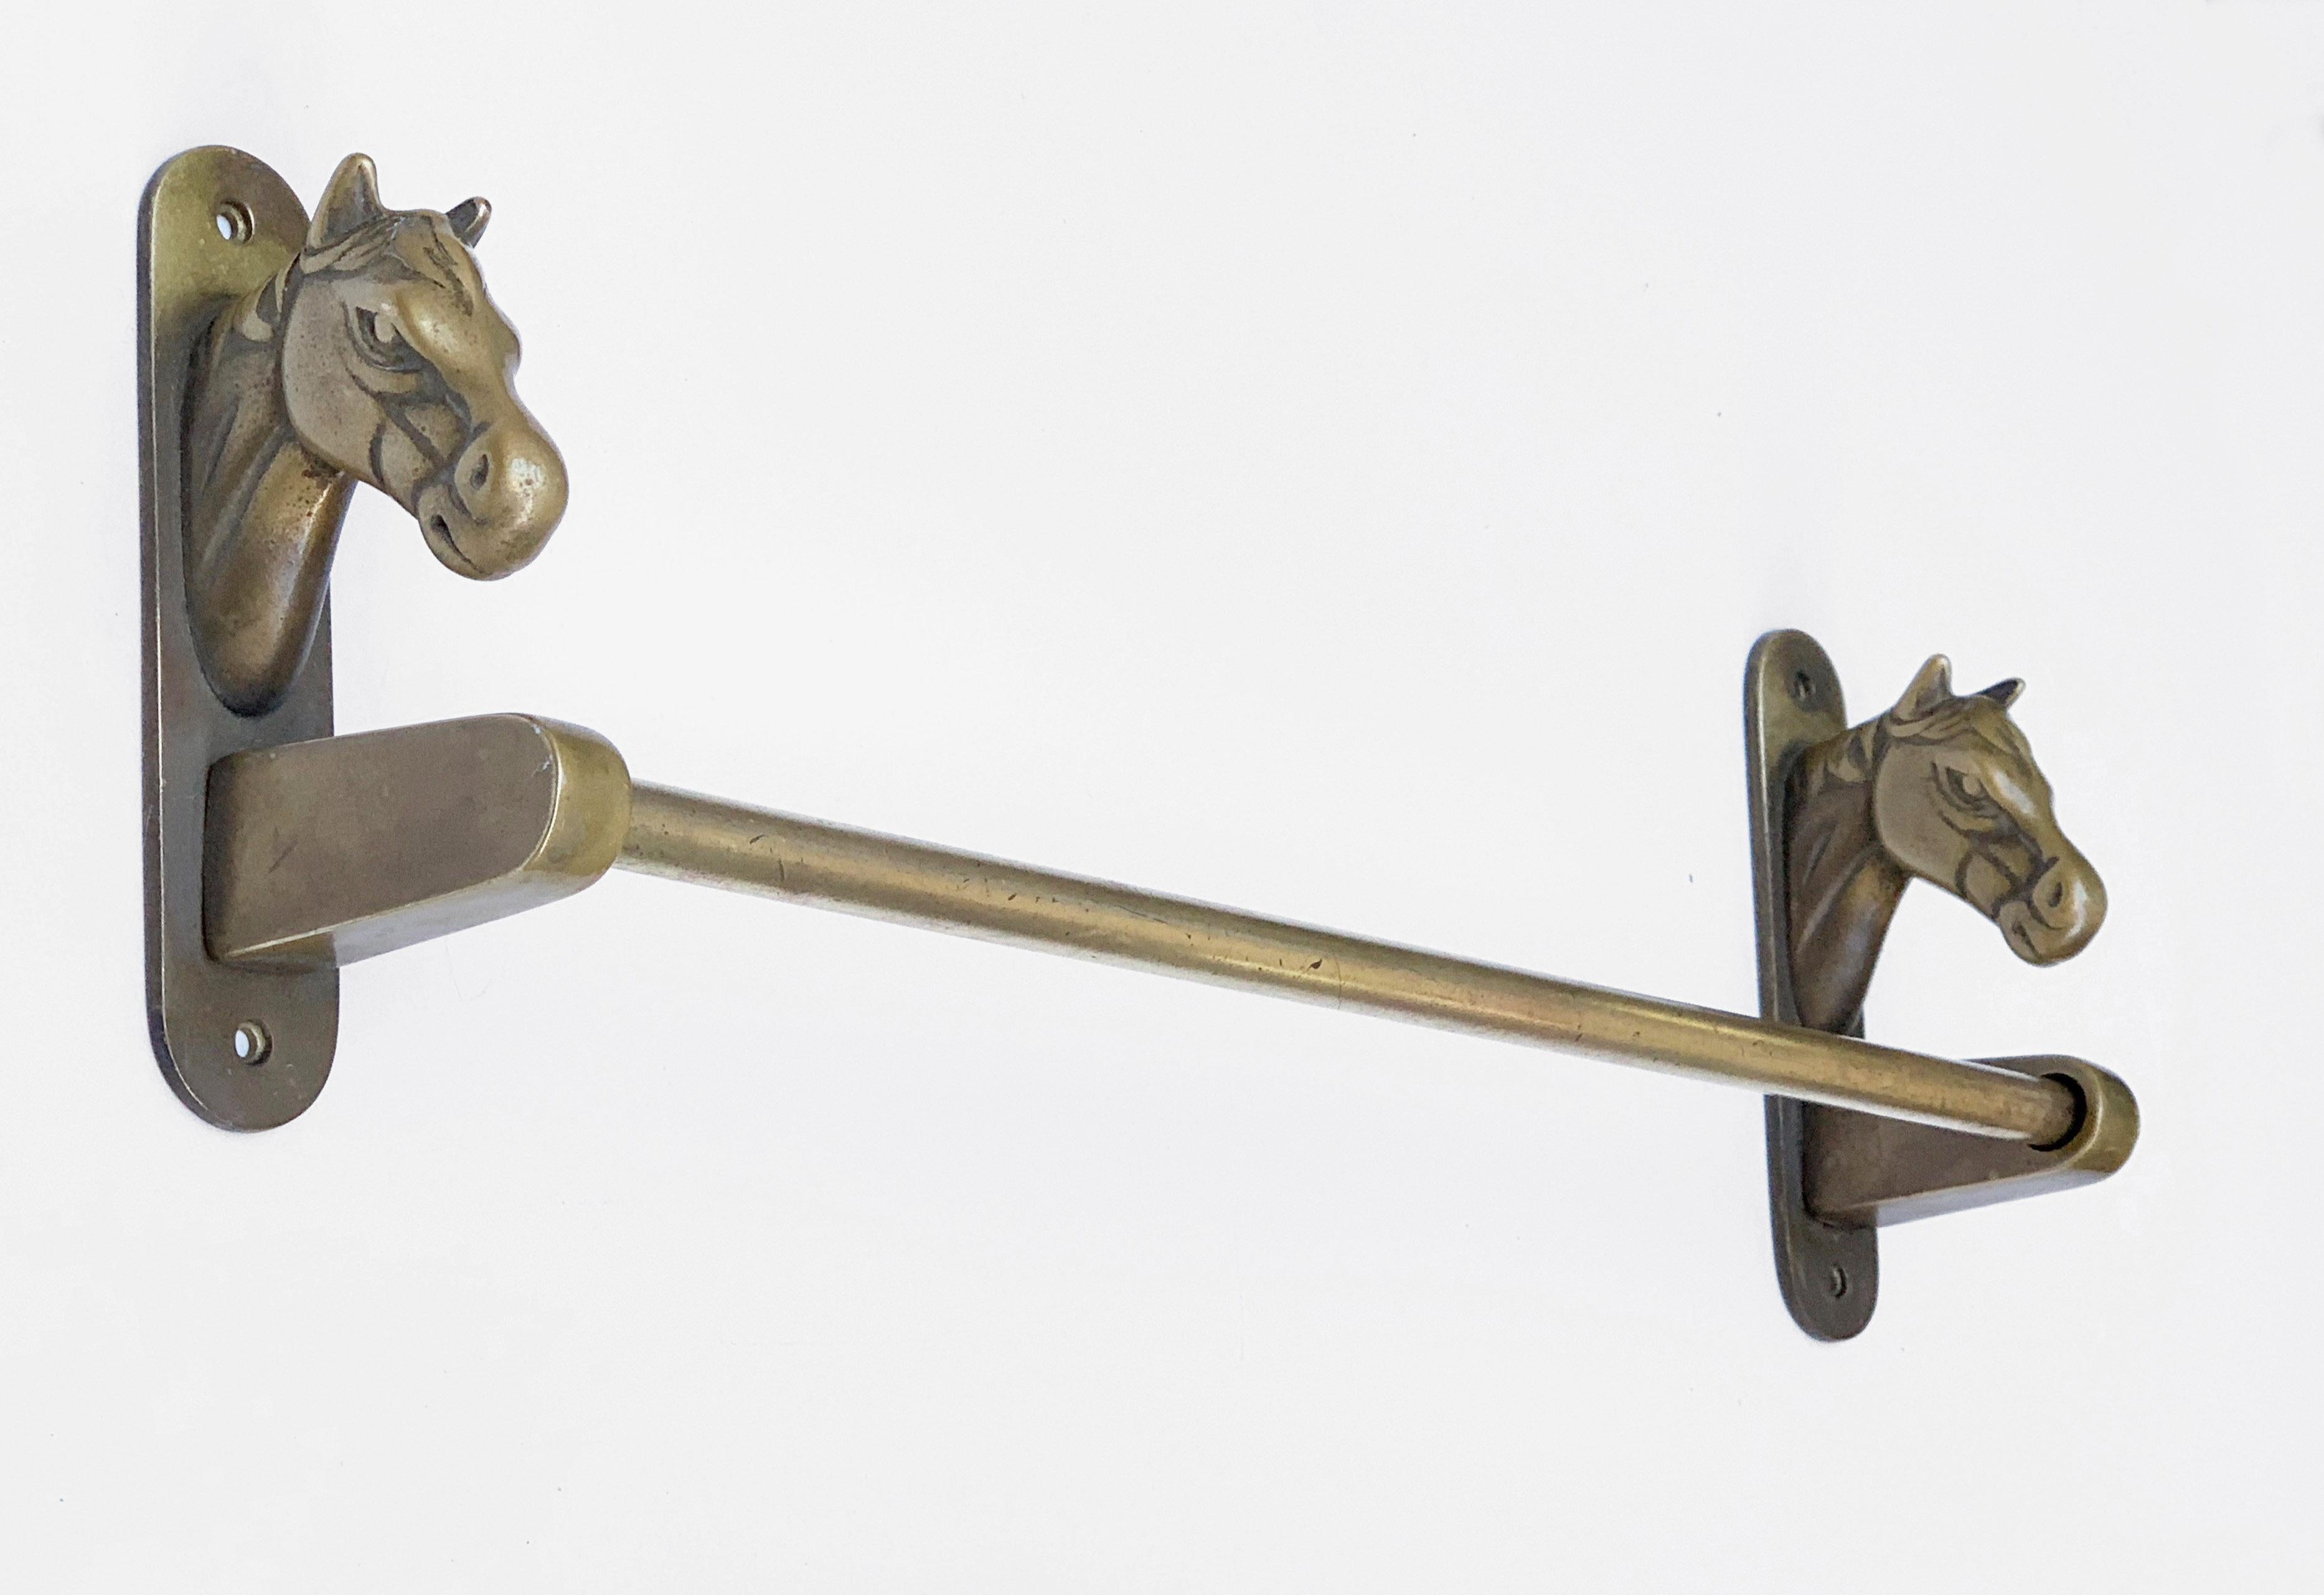 Wonderful bathroom fixture: a brass towel rack with horse heads on the extremities. 

It is made of three solid brass pieces, the two horse heads and the rack. 

It was made in Italy during 1950s. This piece is perfect for a countryside project